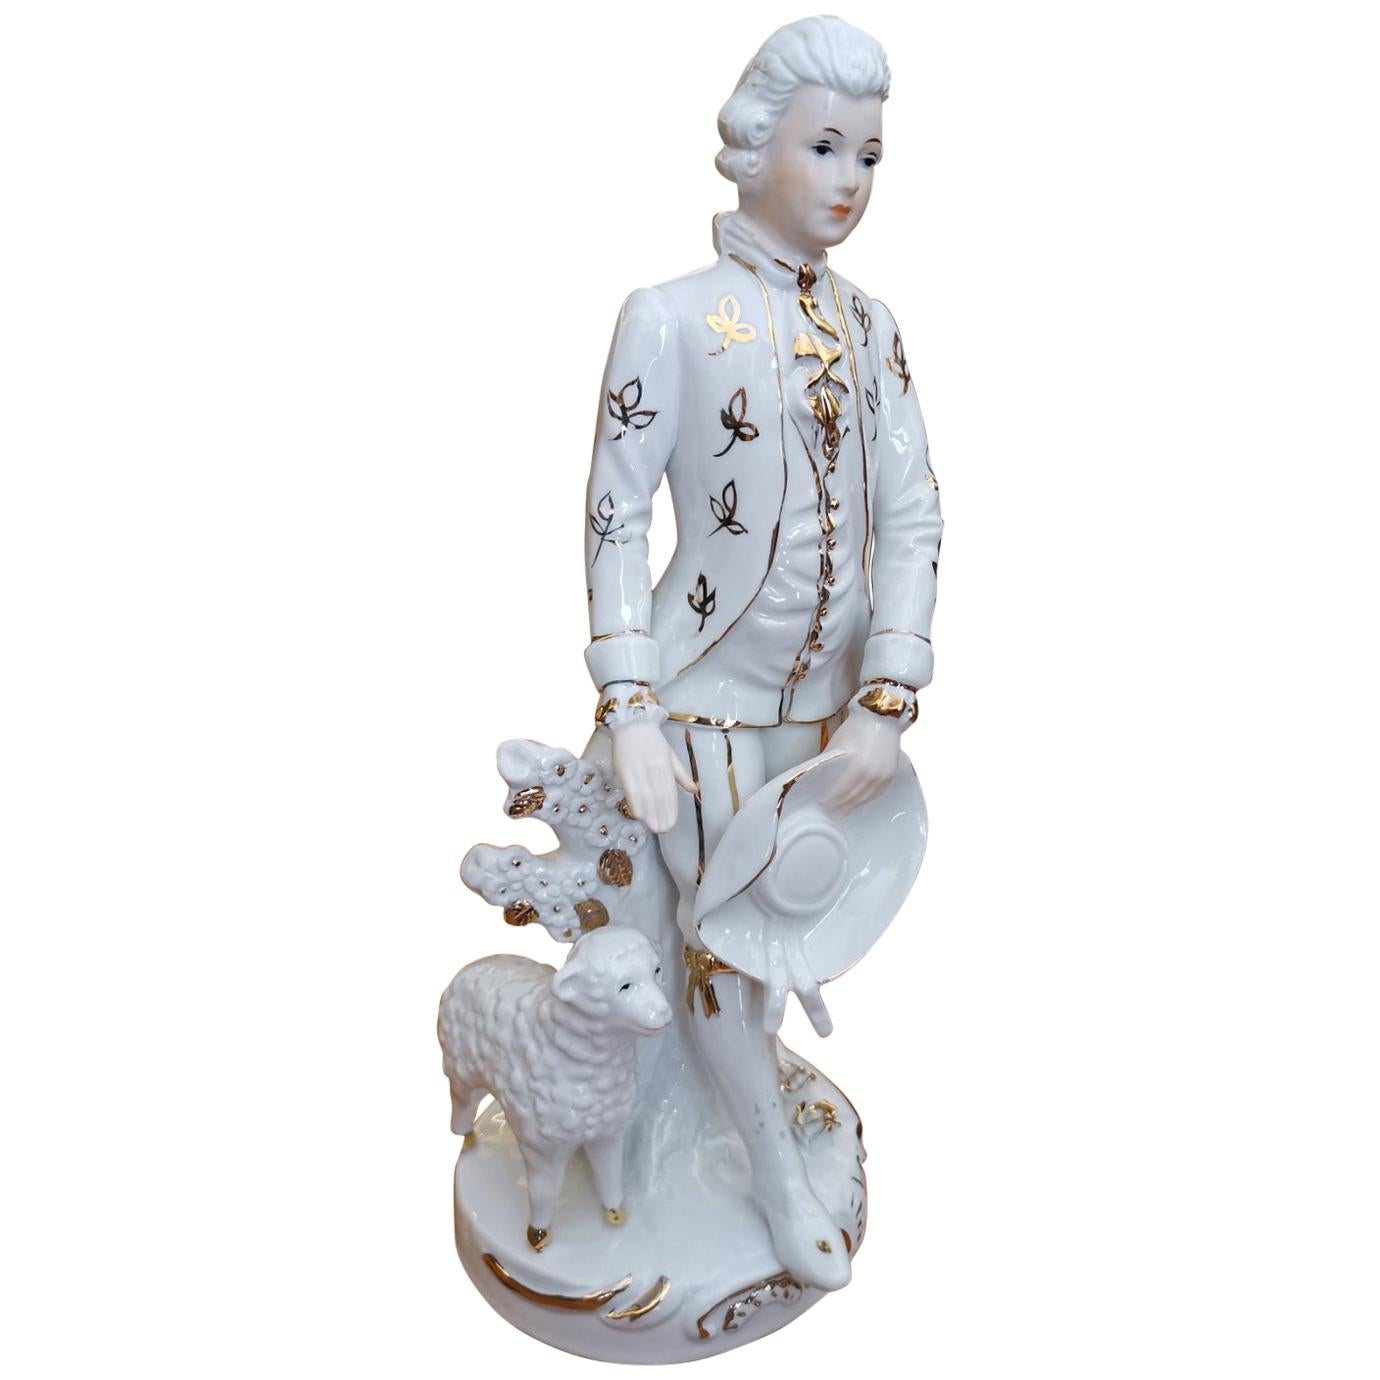 19th Century French Sculpture in White Porcelain with Golden Decorations